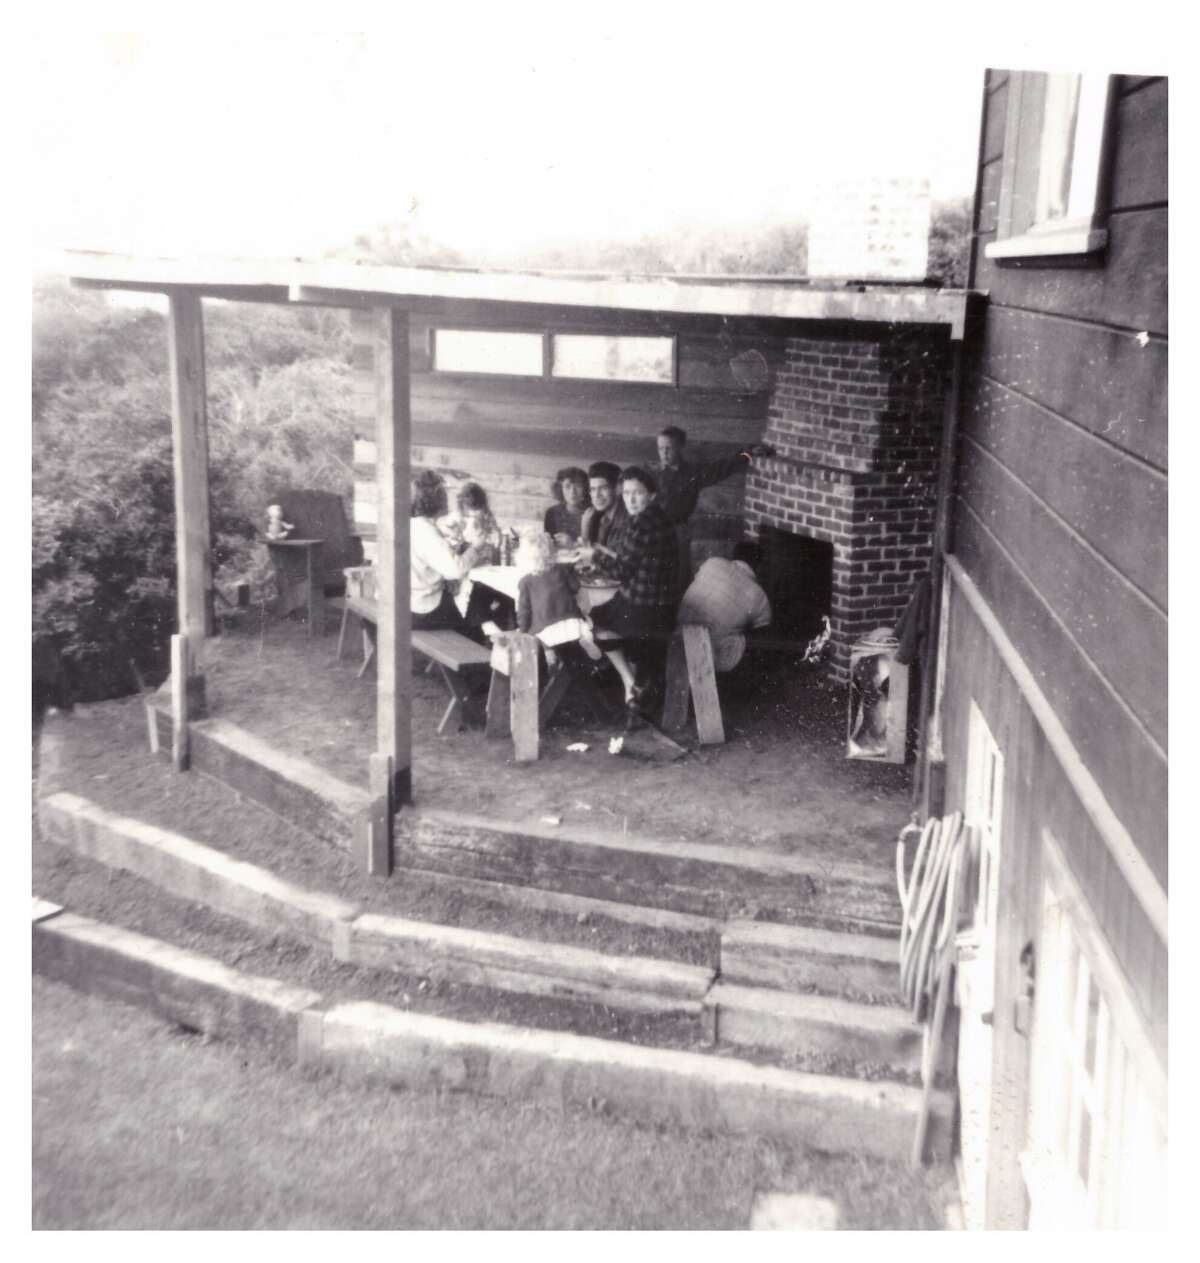 Here's a vintage shot of the family enjoying the outdoor fireplace/covered patio.  